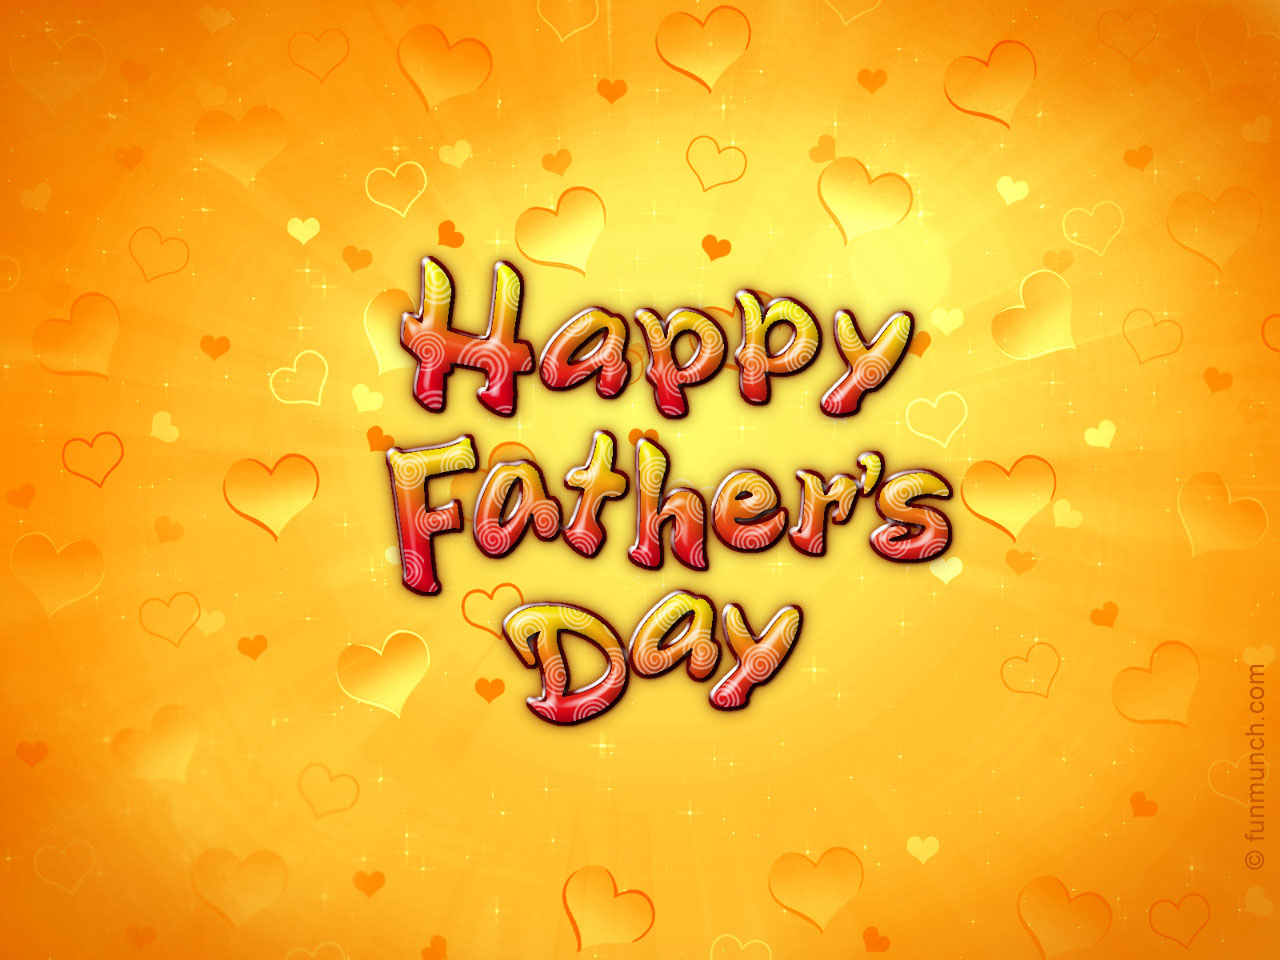 Happy Fathers Day 2014 Greeting Cards Free Images & Wallpapers